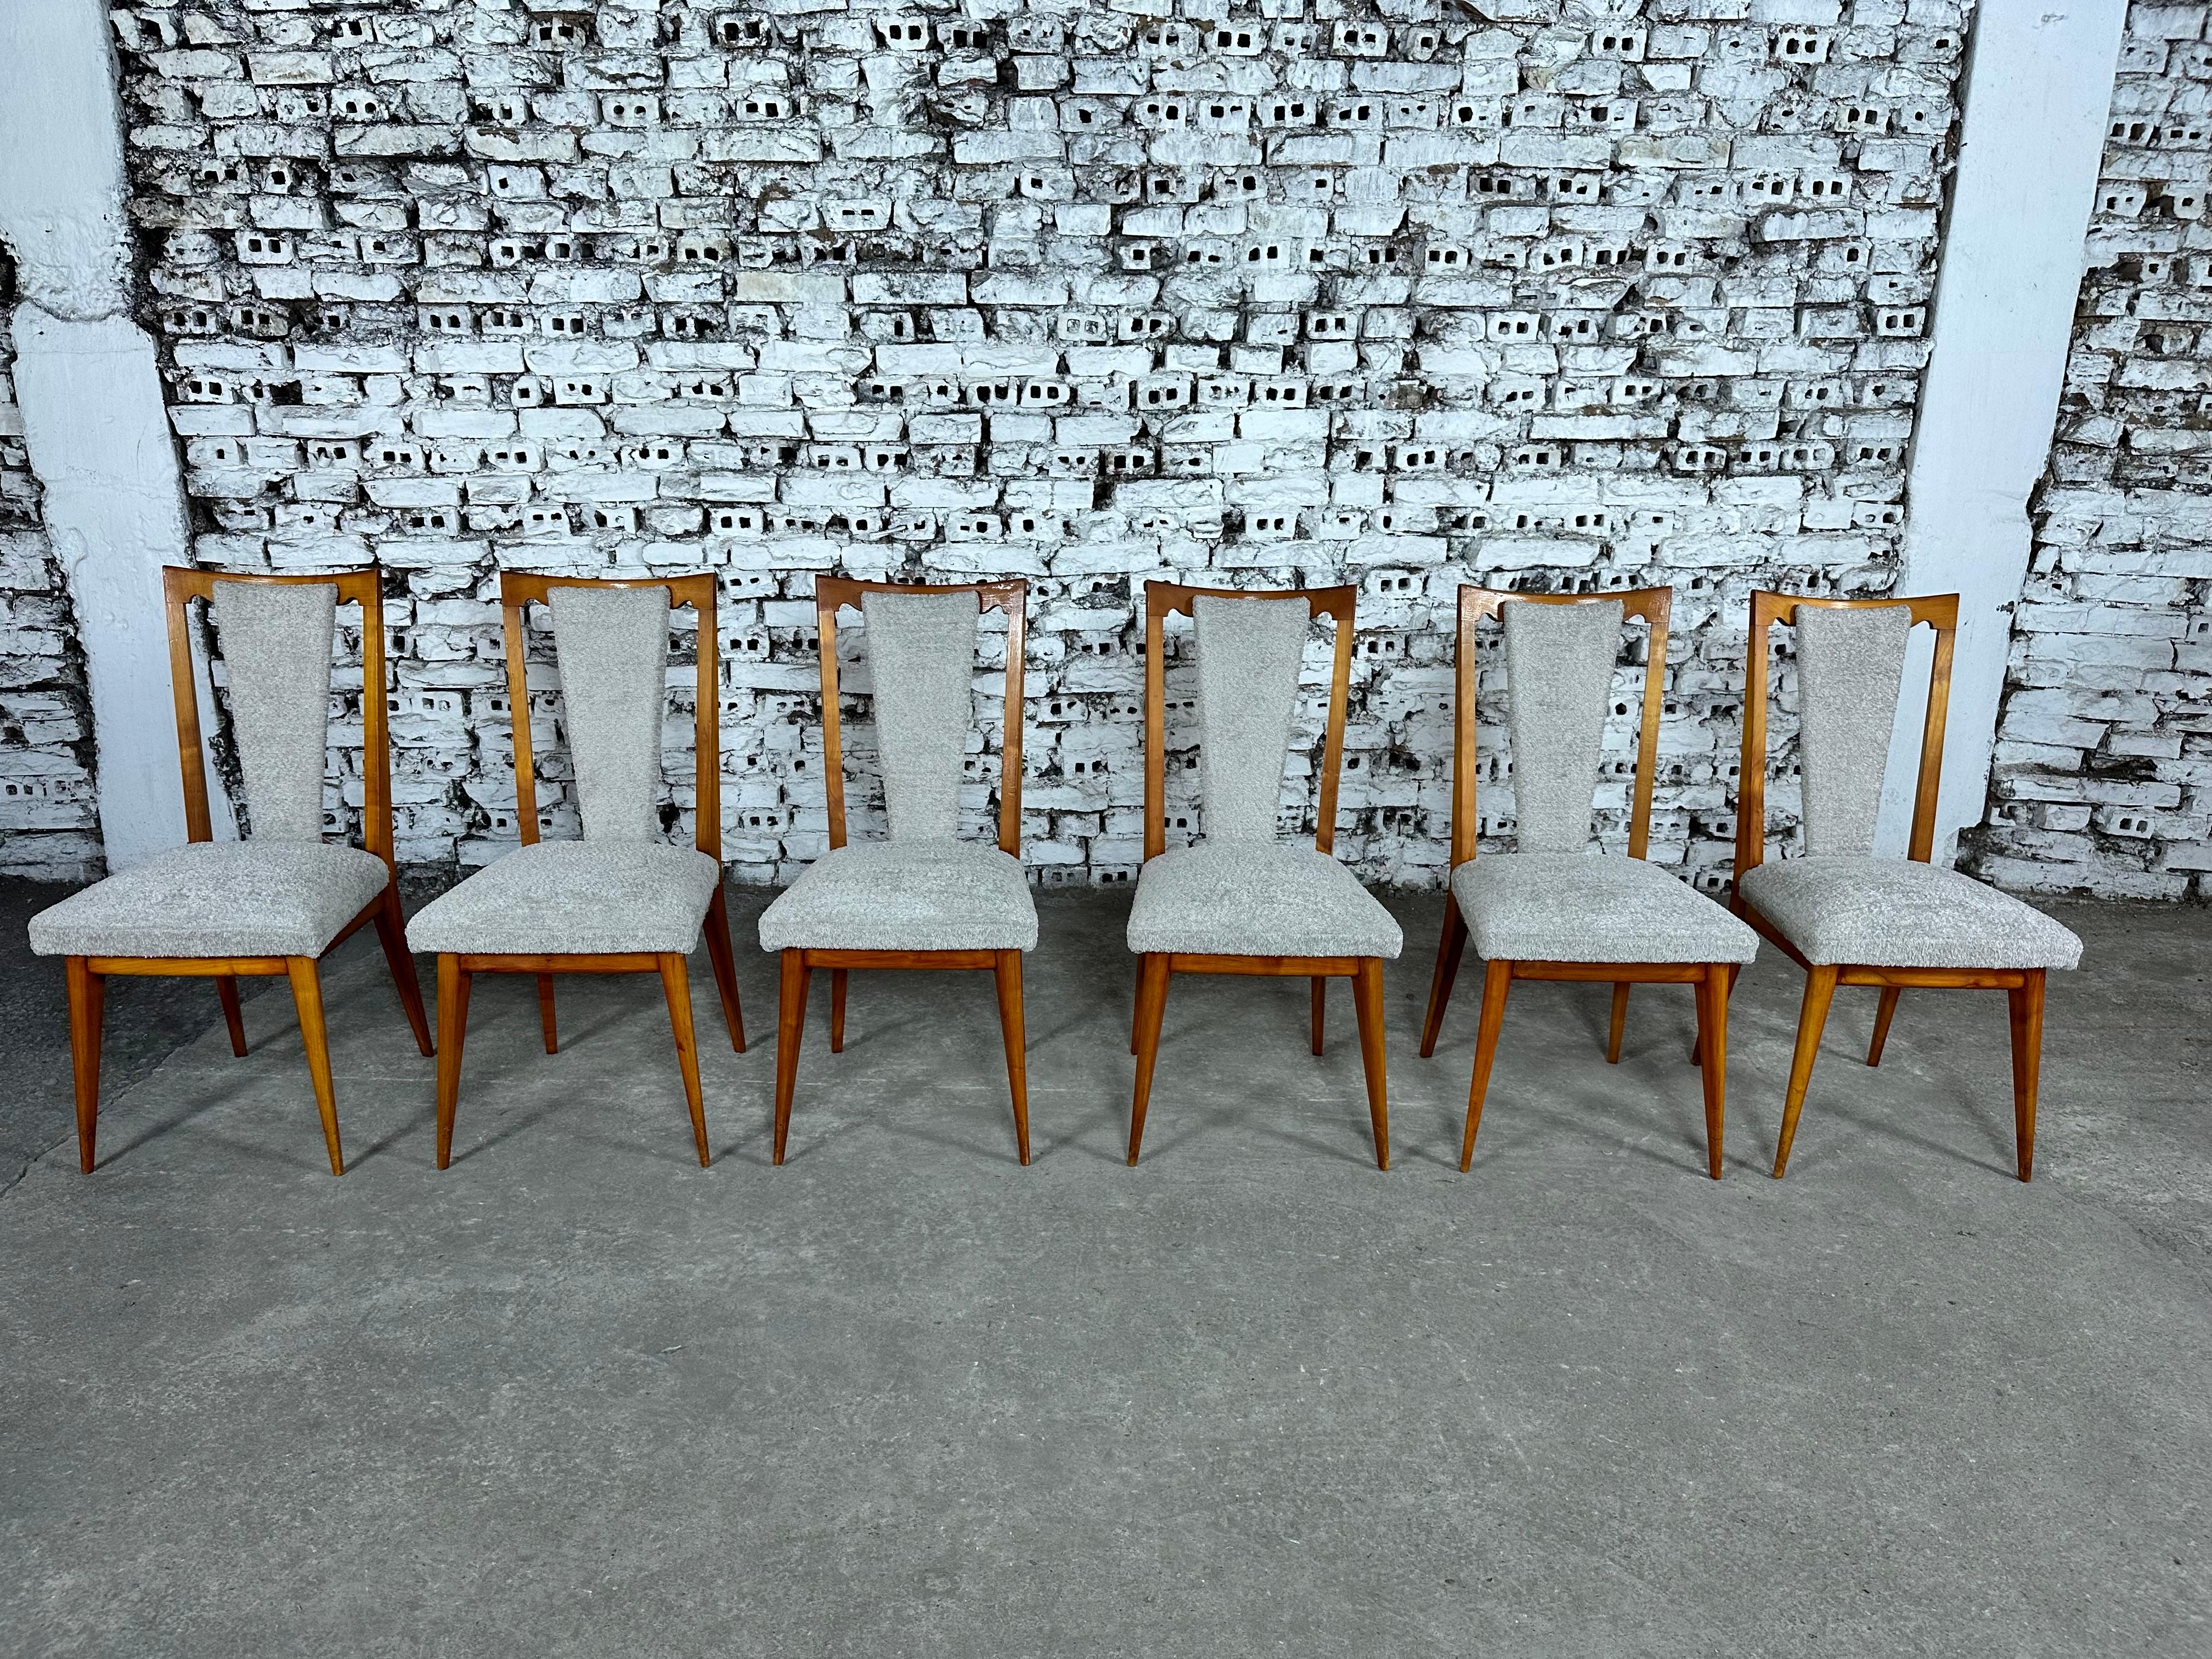 20th Century French Art Deco Styled Dining Chairs, Newly Upholstered - Set of 6 For Sale